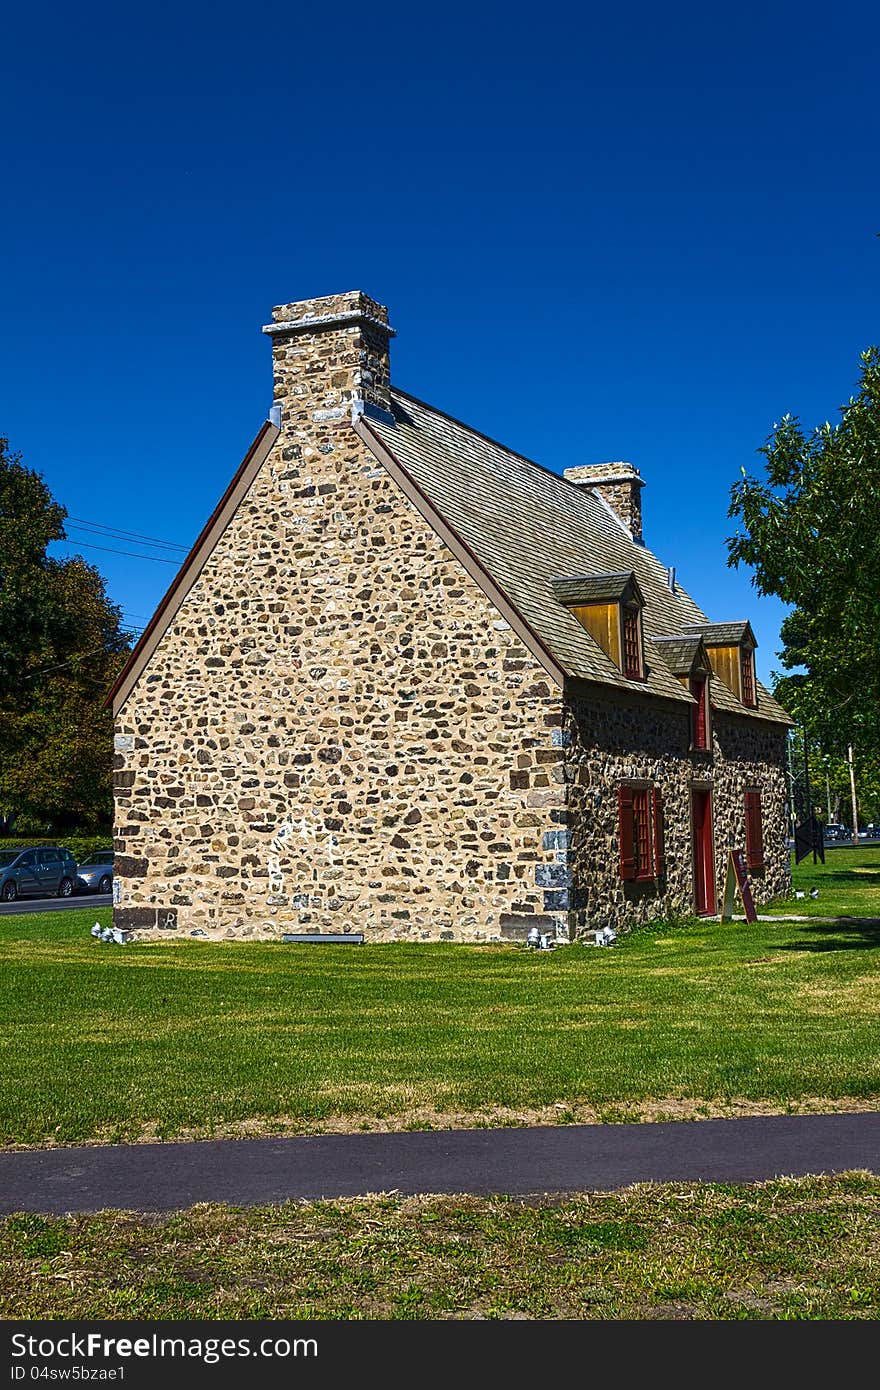 The Norman style old stone house was built in the late 1600's and was recently restored. The Norman style old stone house was built in the late 1600's and was recently restored